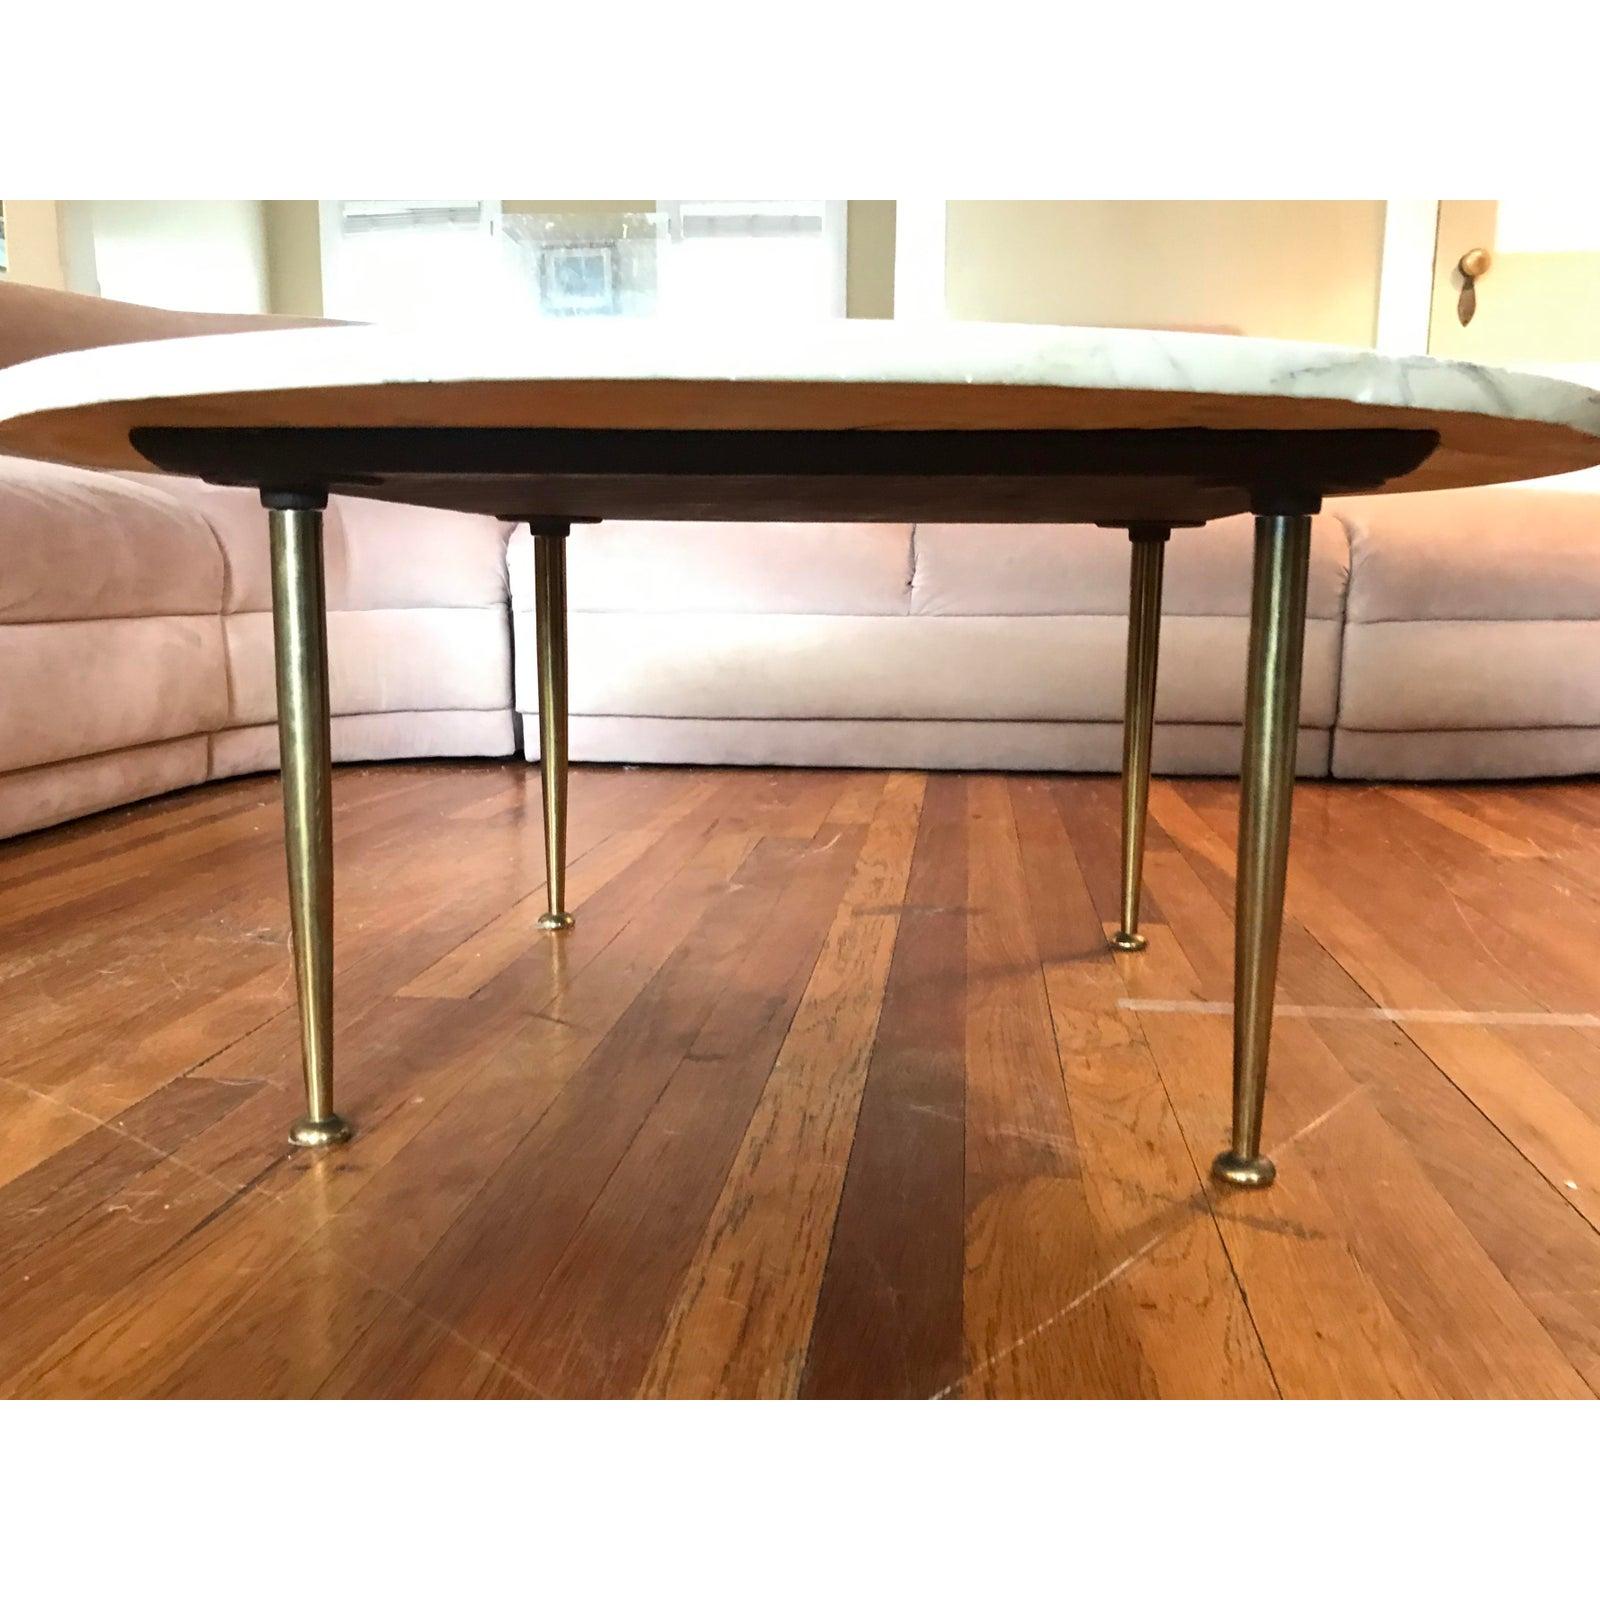 The most beautifully-veined marble cocktail table, with sultry brass stiletto legs. Imported from Italy in the 1950s, per original owner. Feel free to request an independent shipping quote, or for more detailed images.